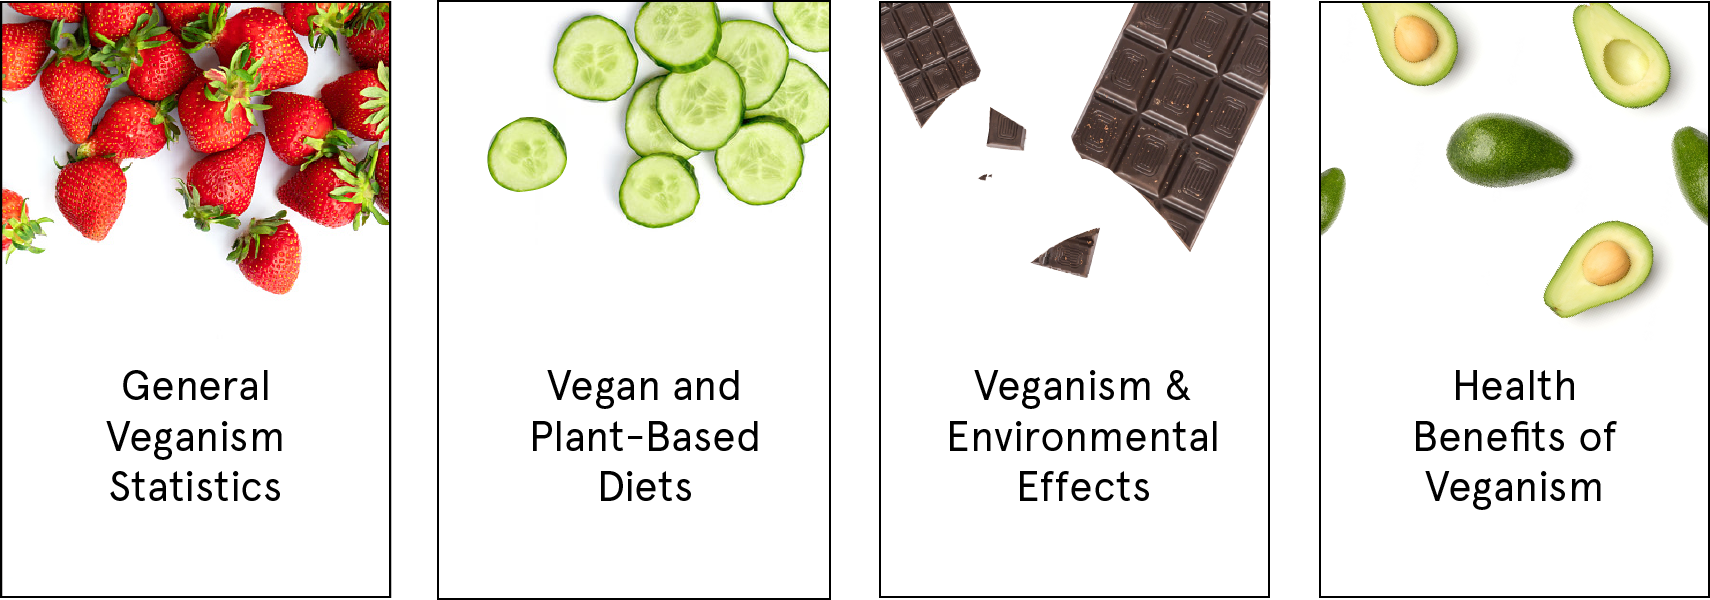 The Vegan Diet: Benefits, Food Lists, Risks, and More